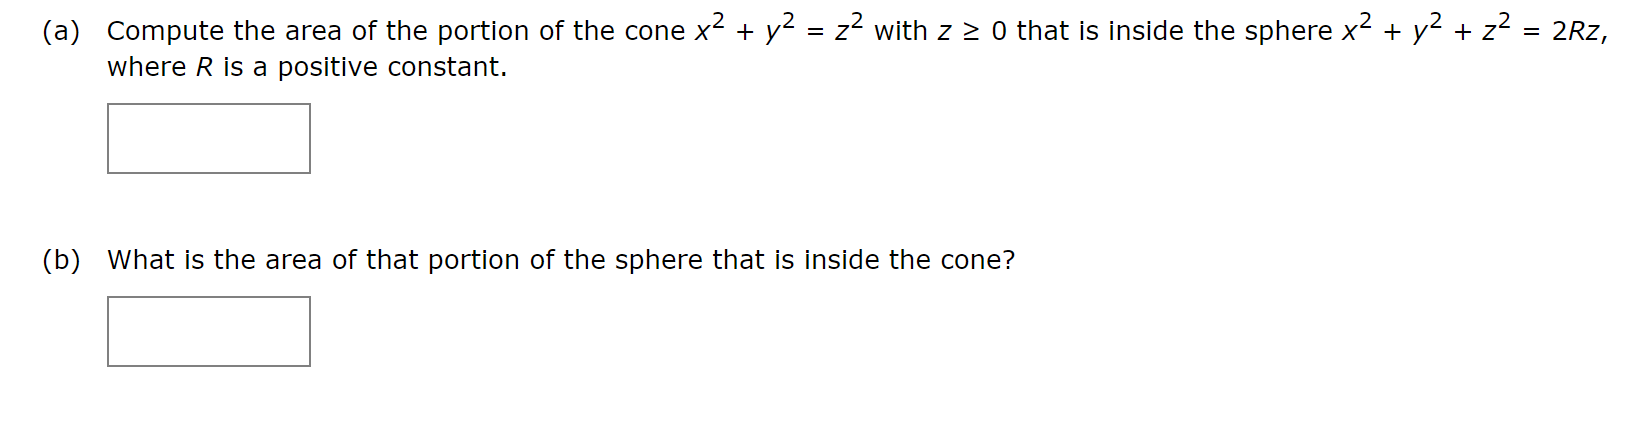 (a) Compute the area of the portion of the cone x2 + y2 = z? with z 2 0 that is inside the sphere x2 + y2 + z2 = 2Rz,
where R is a positive constant.
(b) What is the area of that portion of the sphere that is inside the cone?
